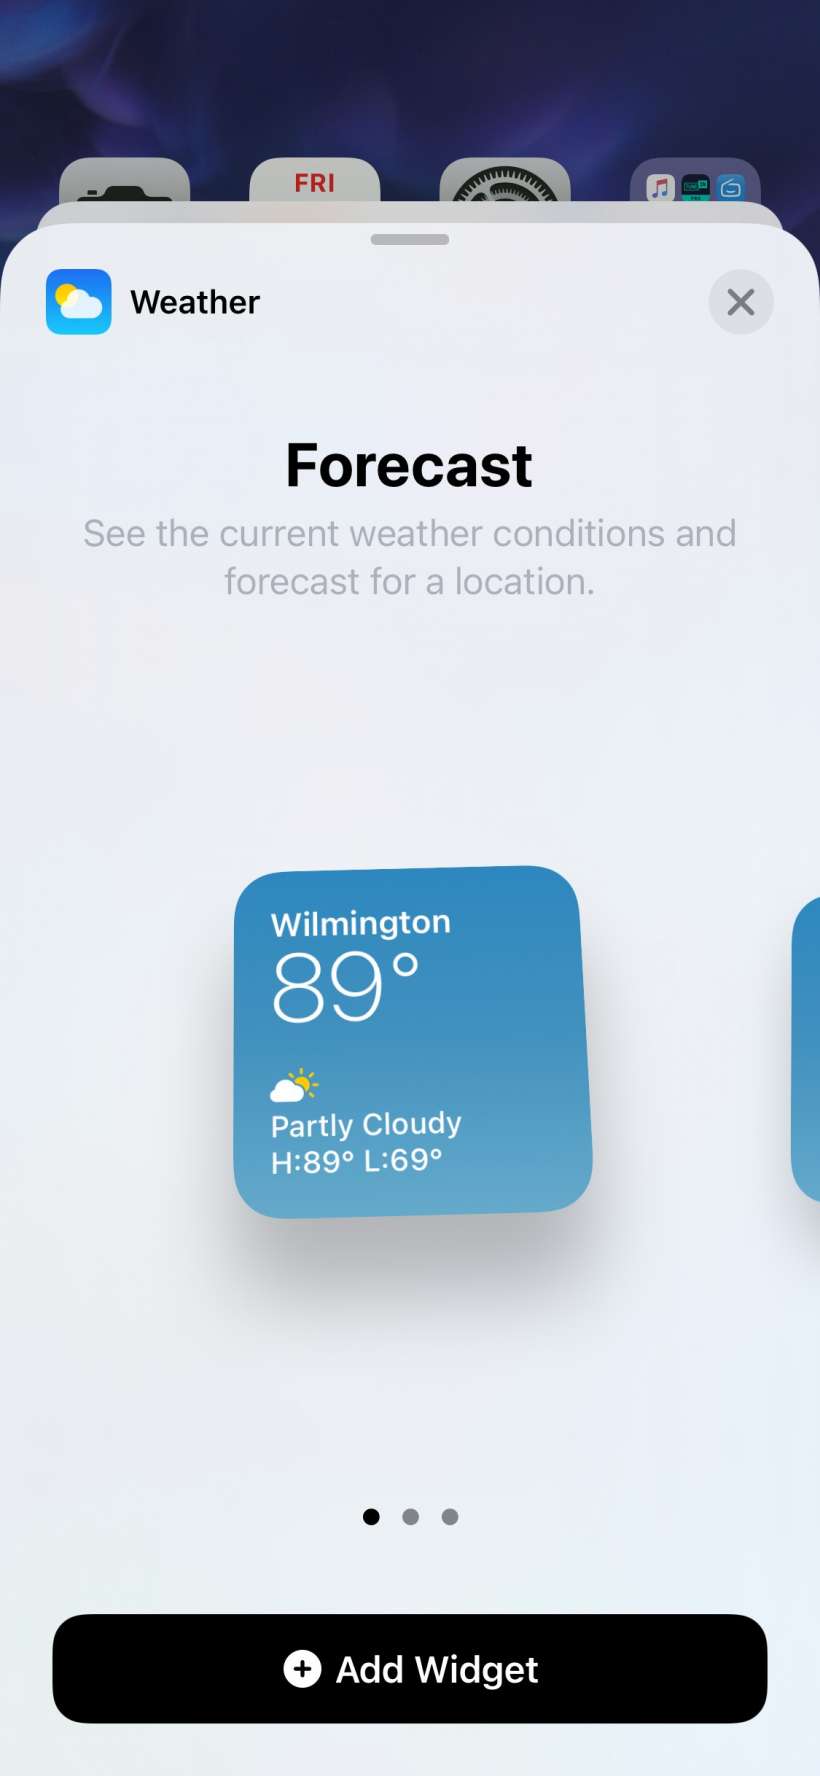 How to add widgets to the Home Screen on iPhone and iPad.